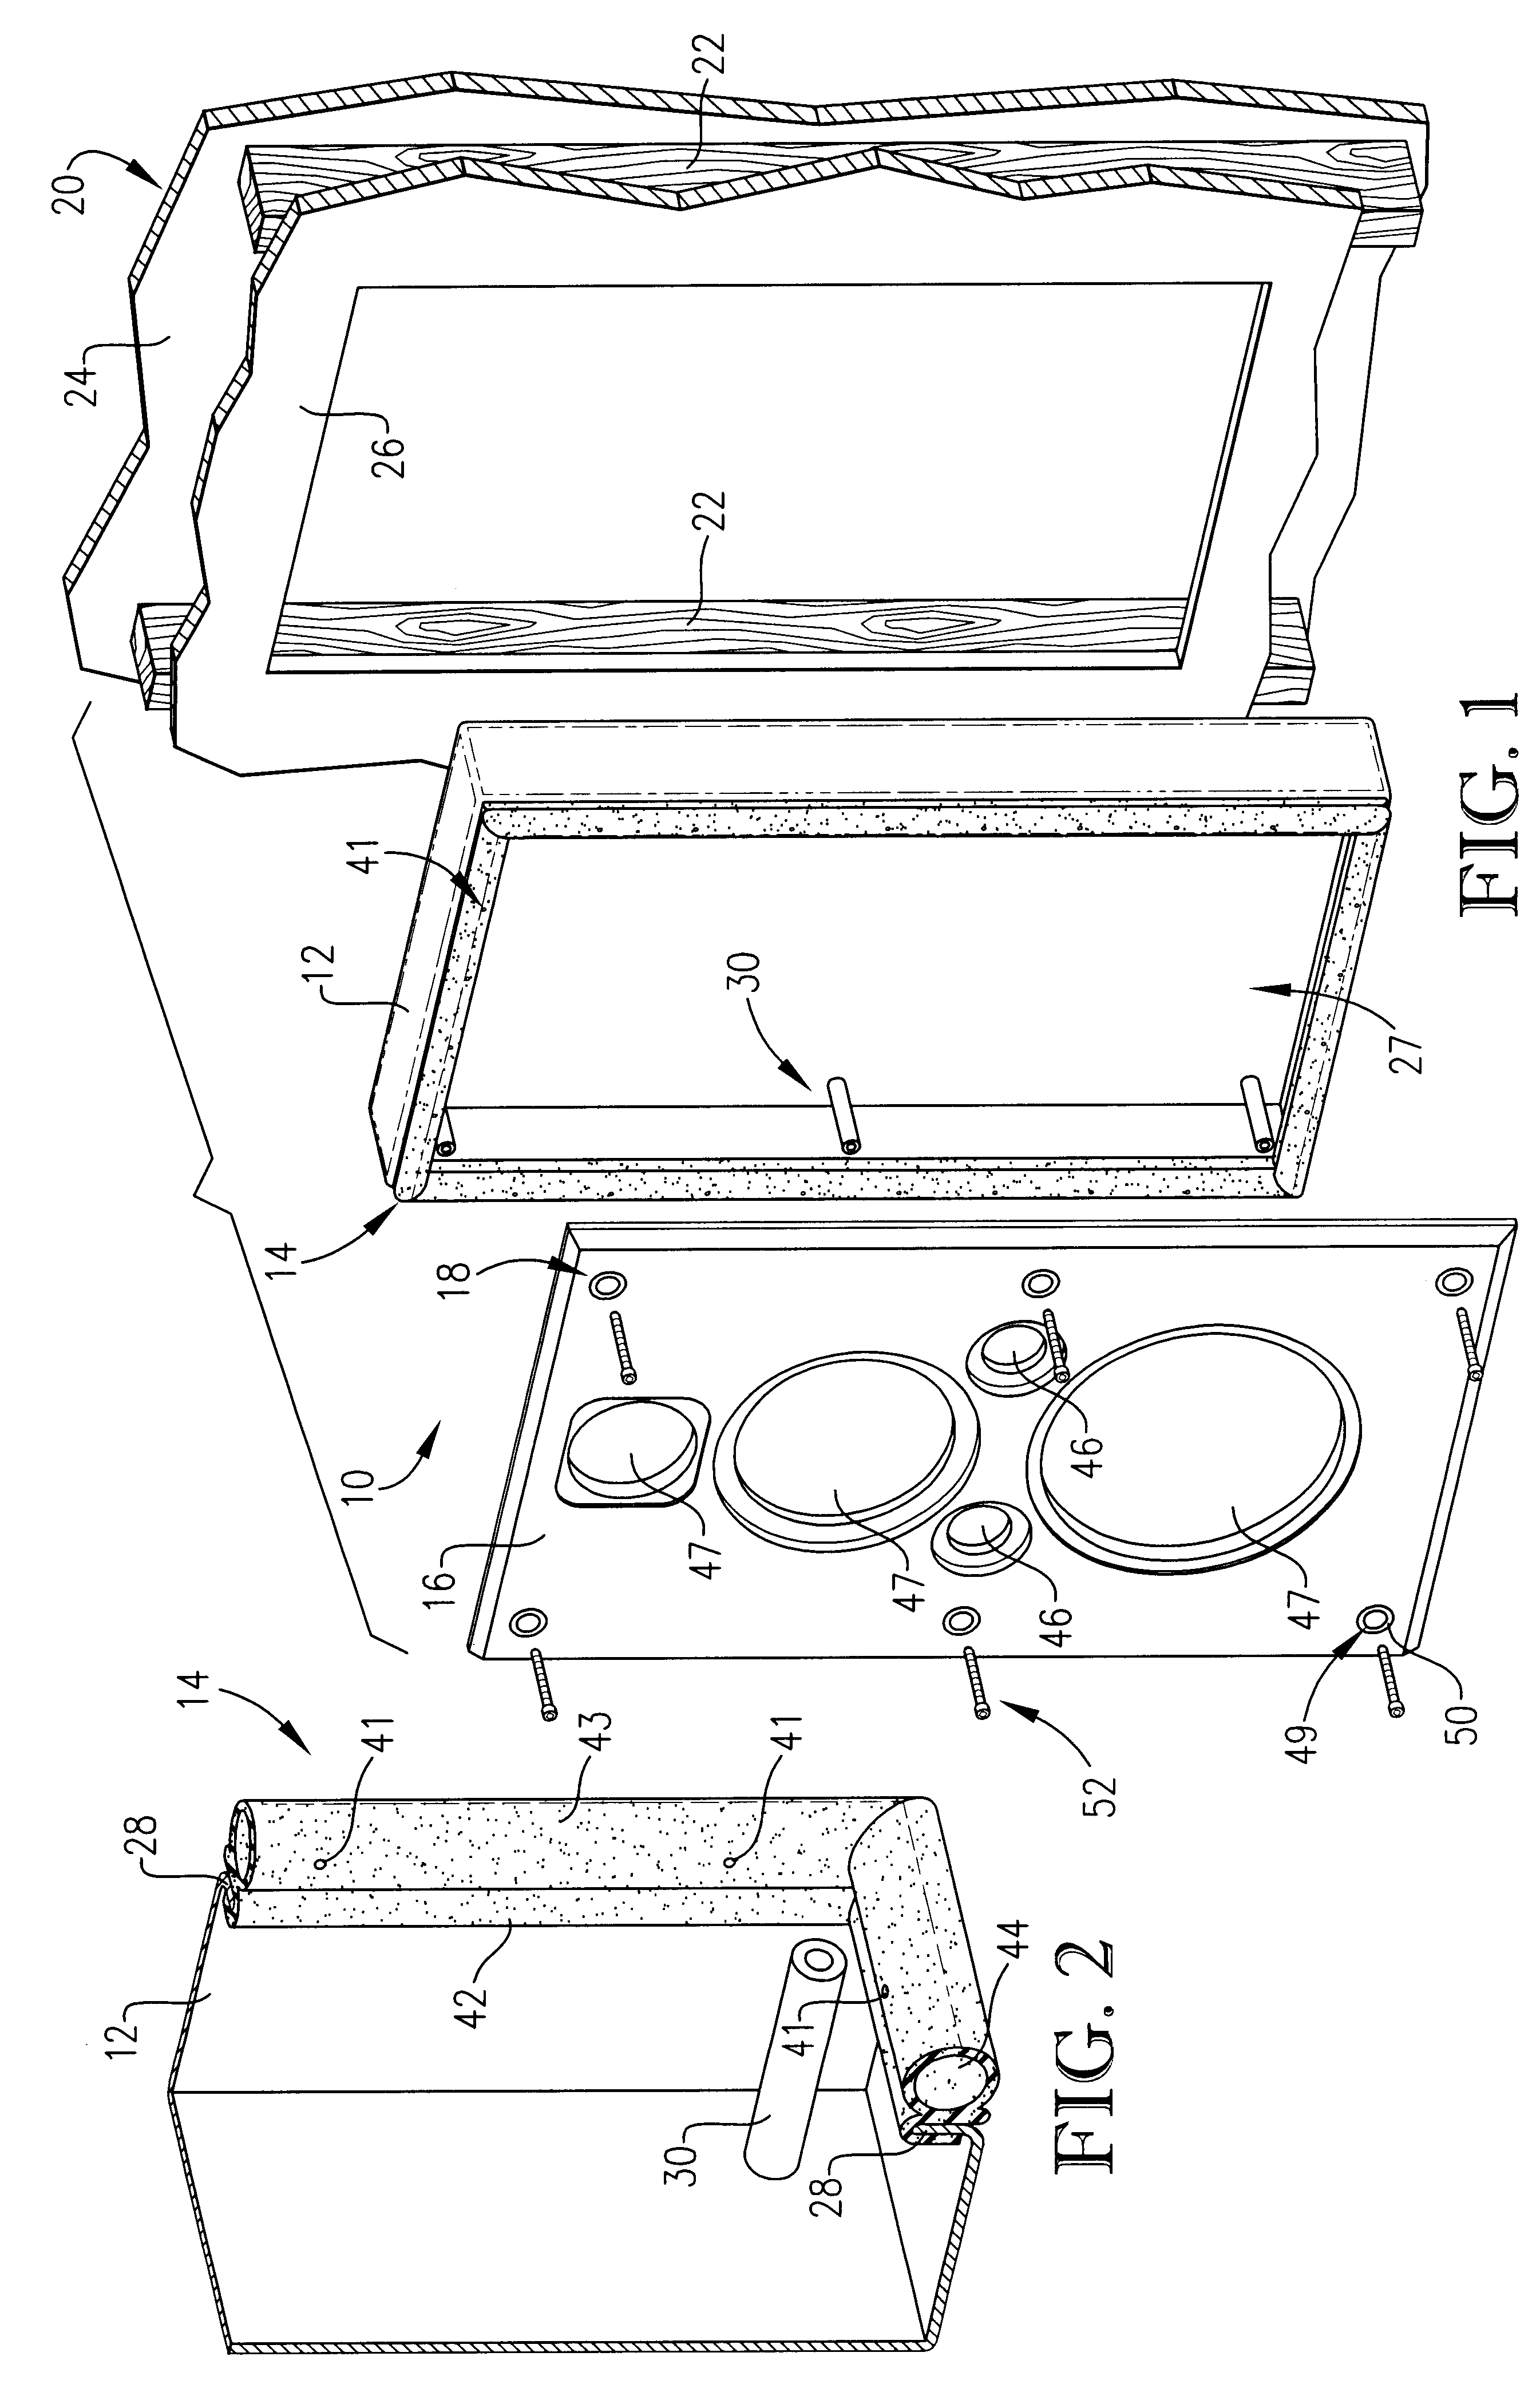 Speaker enclosure and mounting method for isolating and insulating faceplate and heavy speakers from surrounding mounting surface